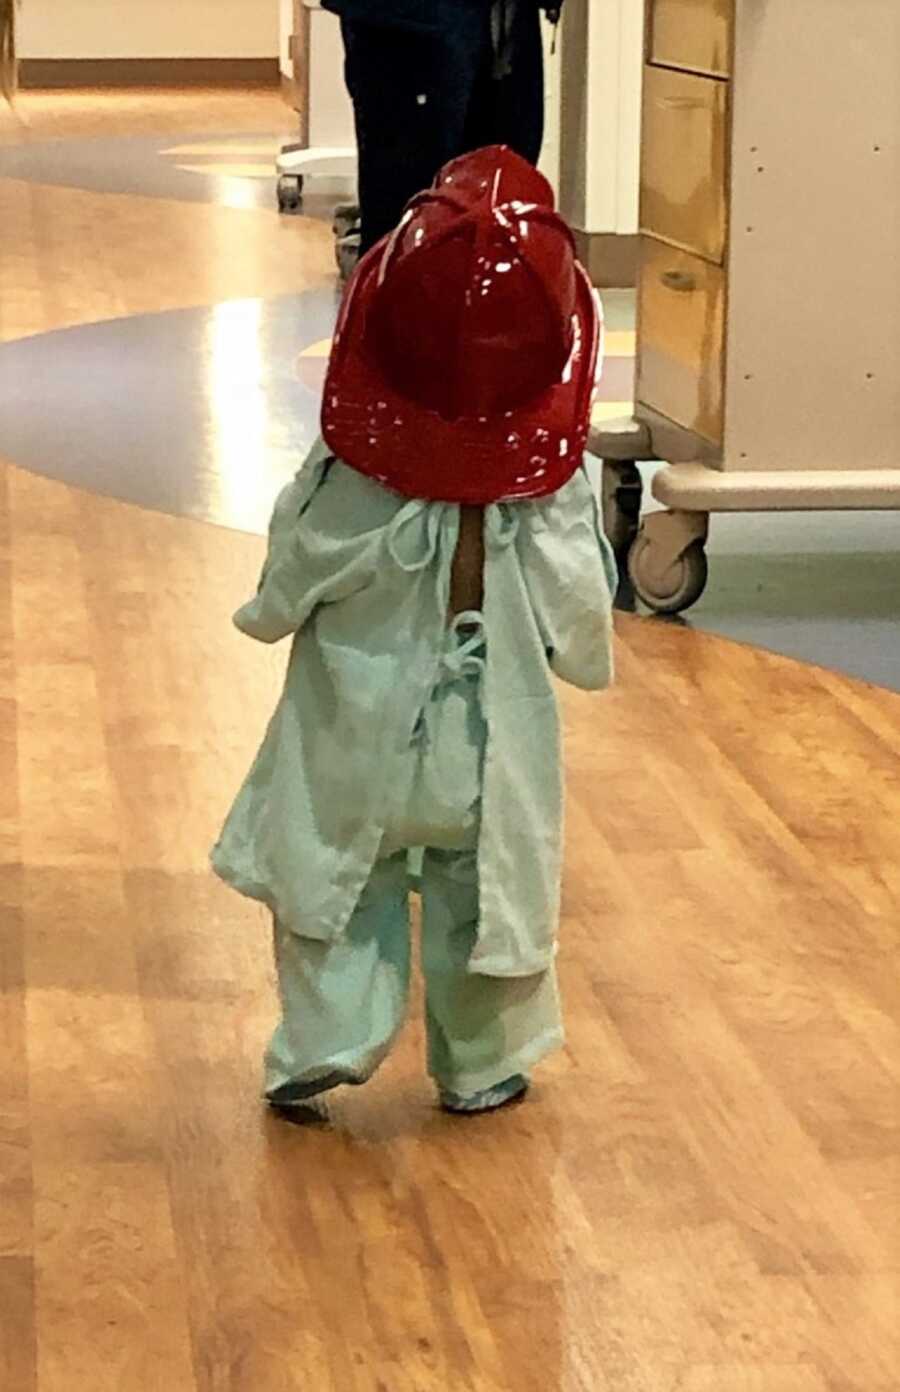 A young patient in hospital clothing walks away wearing a firefighter hat.